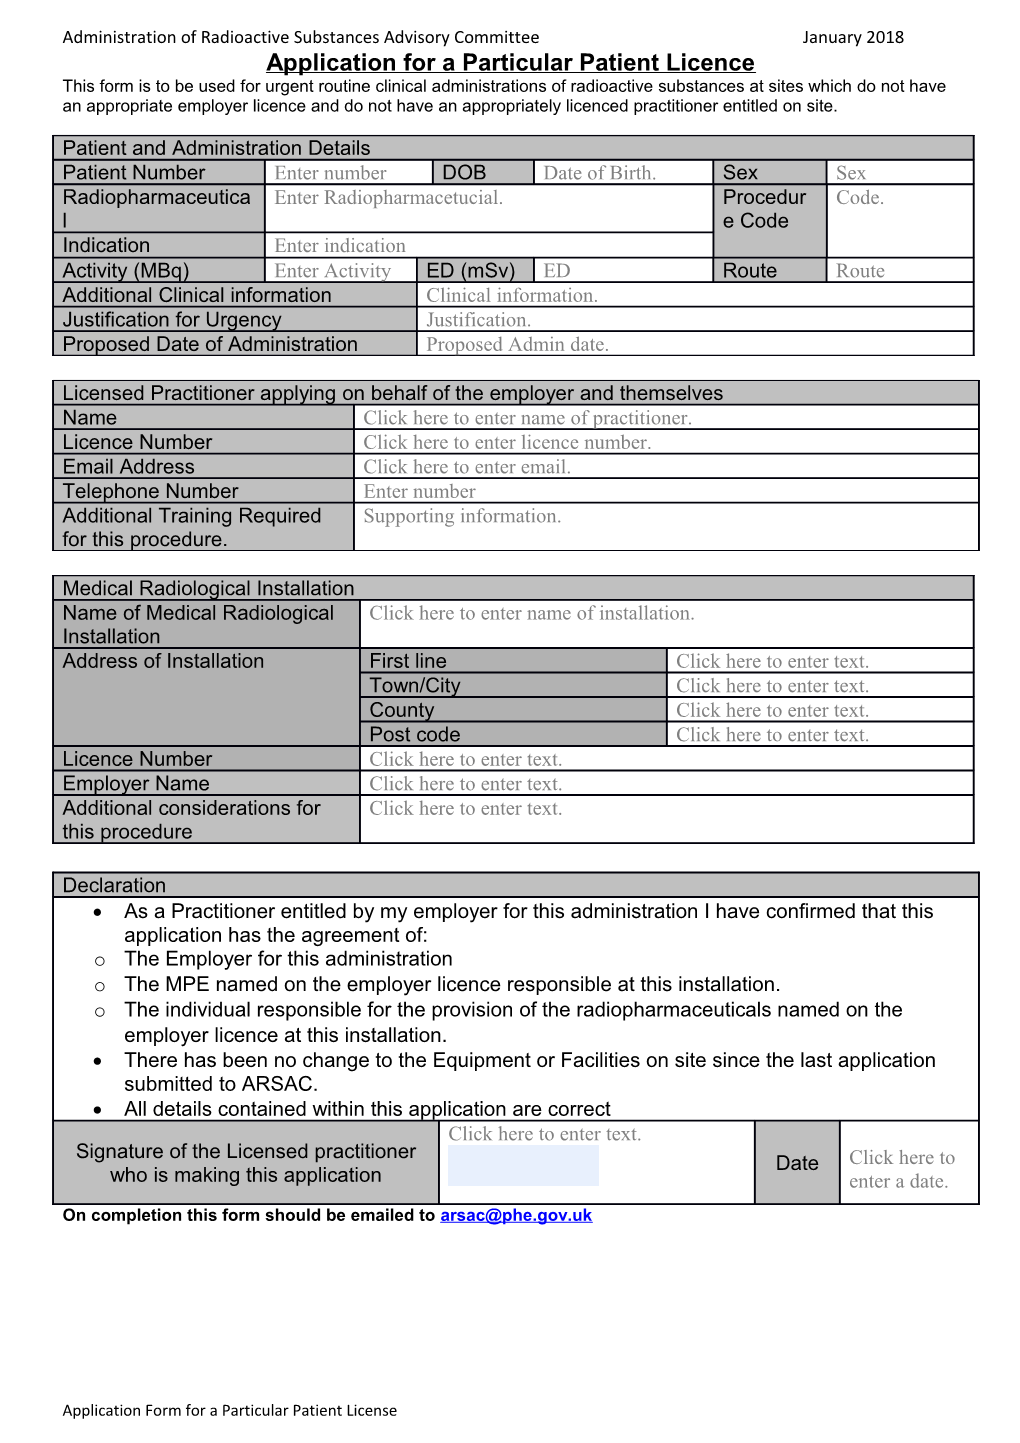 Application for a Particular Patient Licence